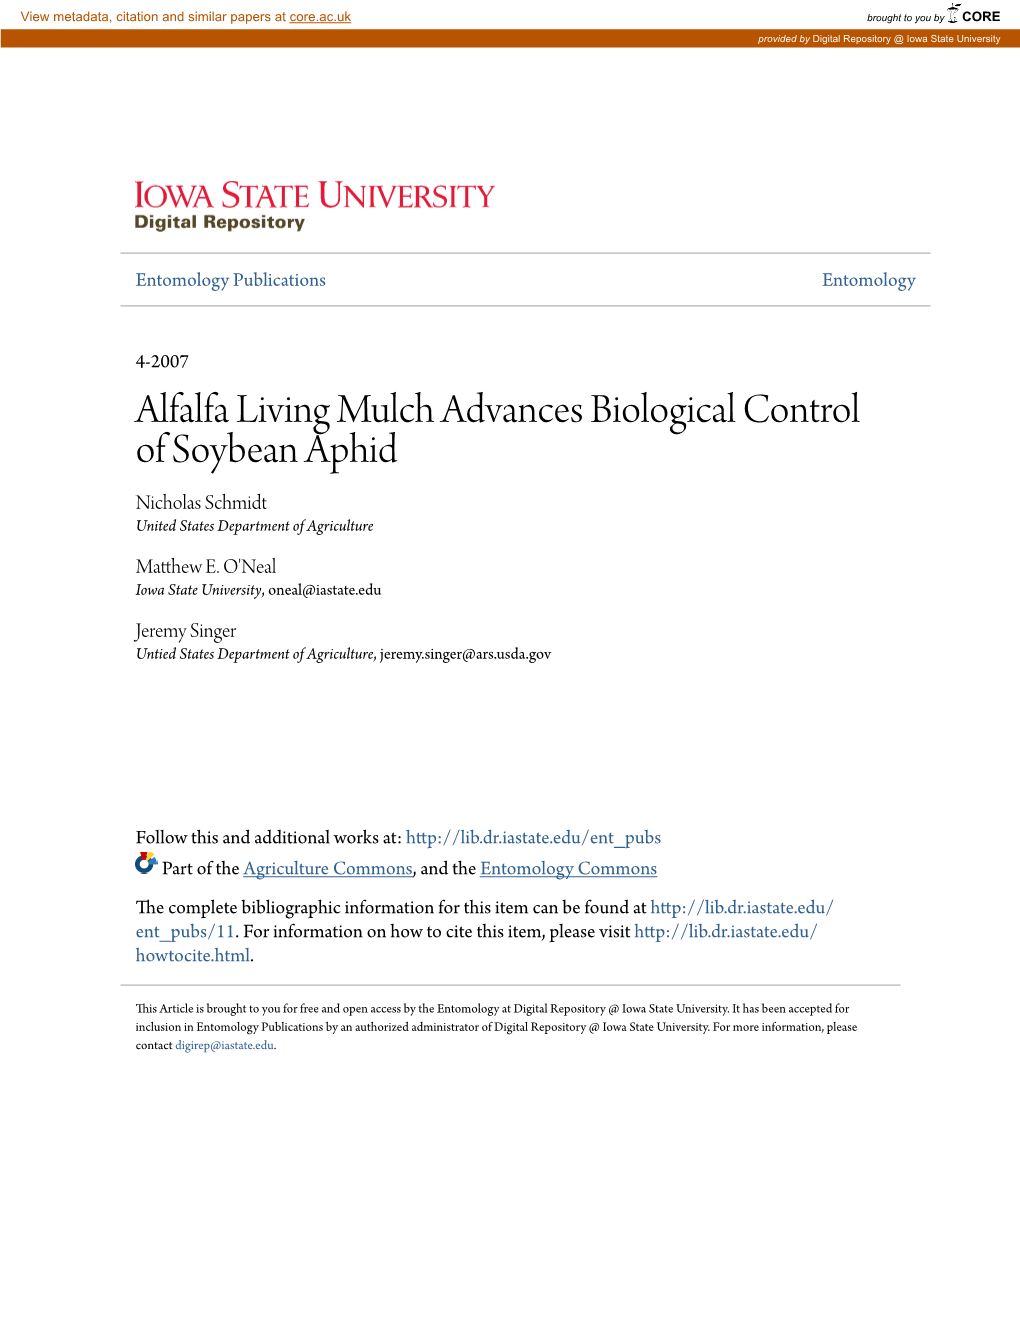 Alfalfa Living Mulch Advances Biological Control of Soybean Aphid Nicholas Schmidt United States Department of Agriculture